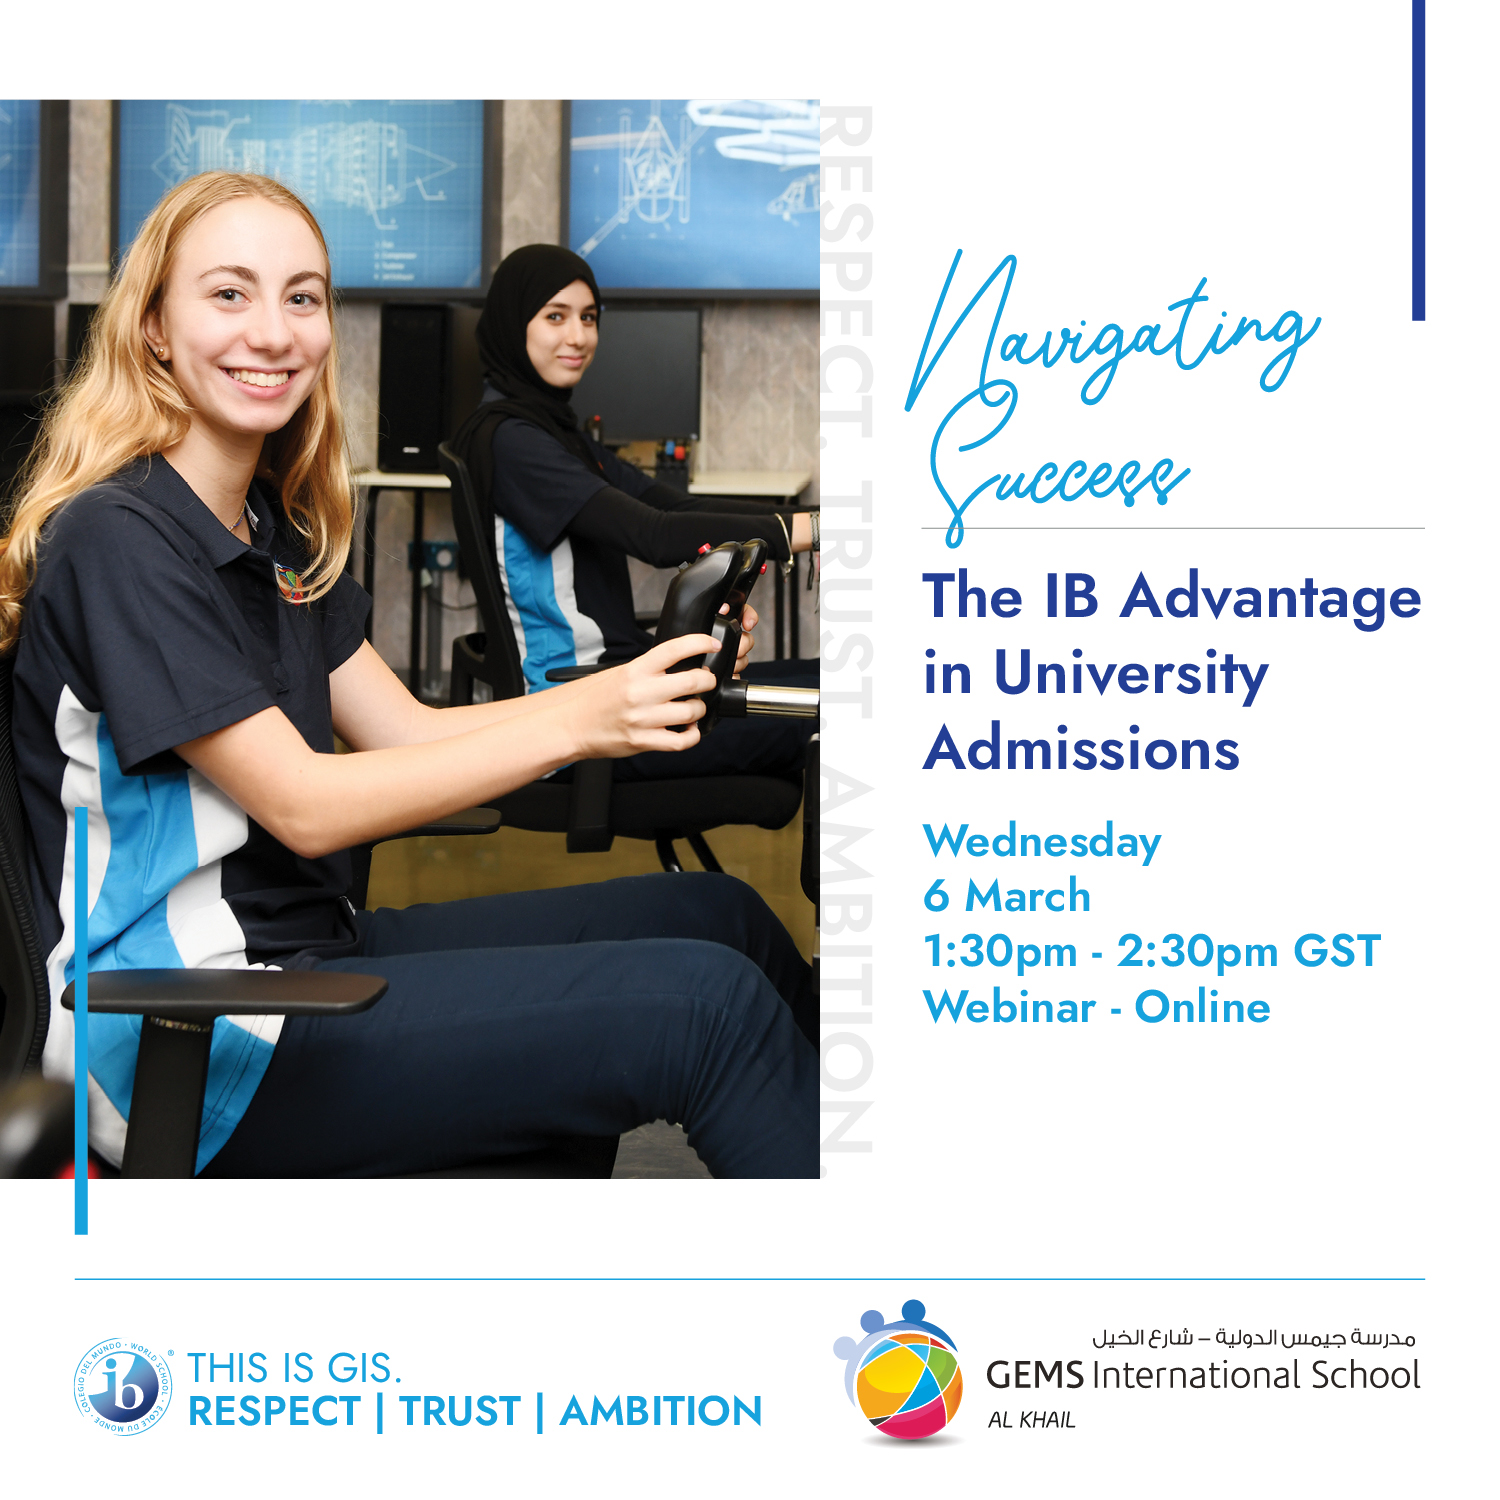 Navigating Success: The IB Advantage in University Admissions